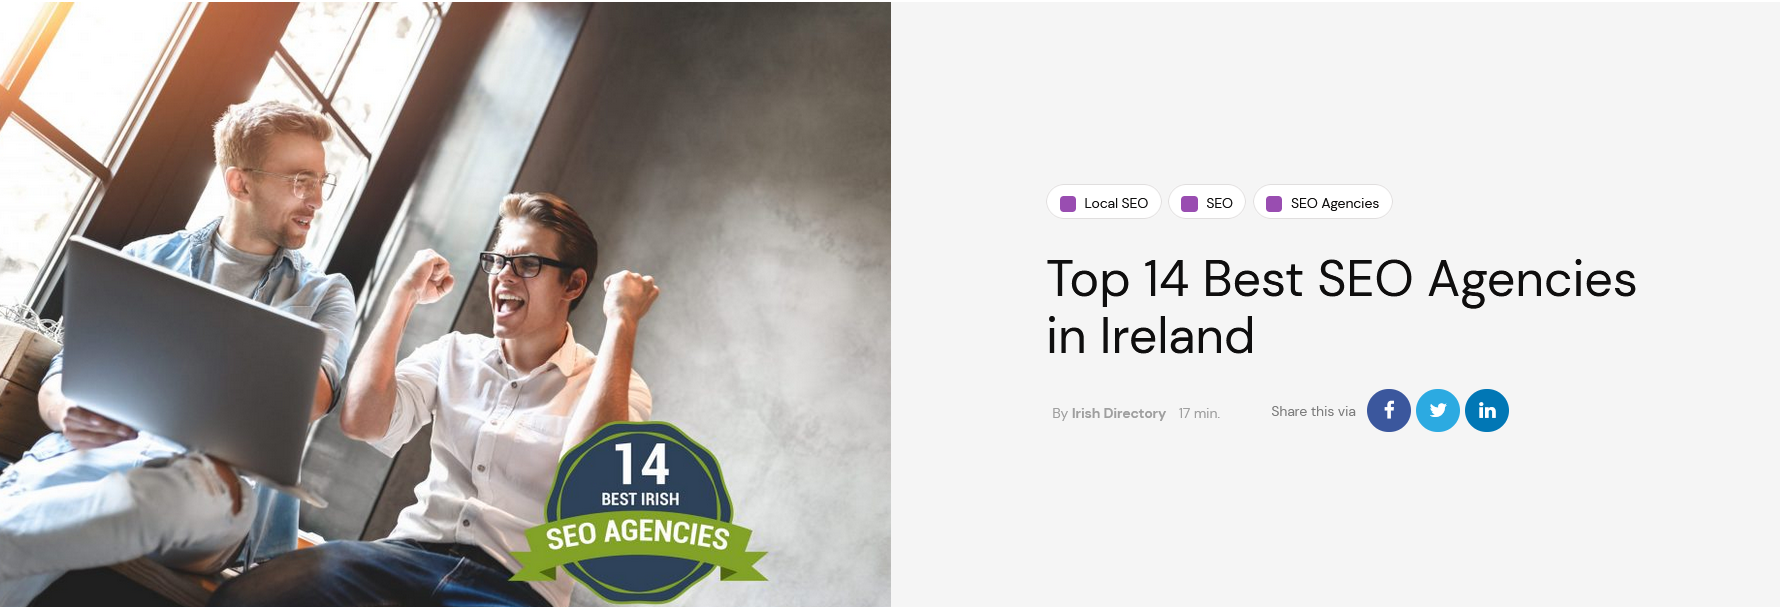 Great News!!  Digital Sales have been awarded as a Top SEO Agency in Ireland…well done to the SEO Team.